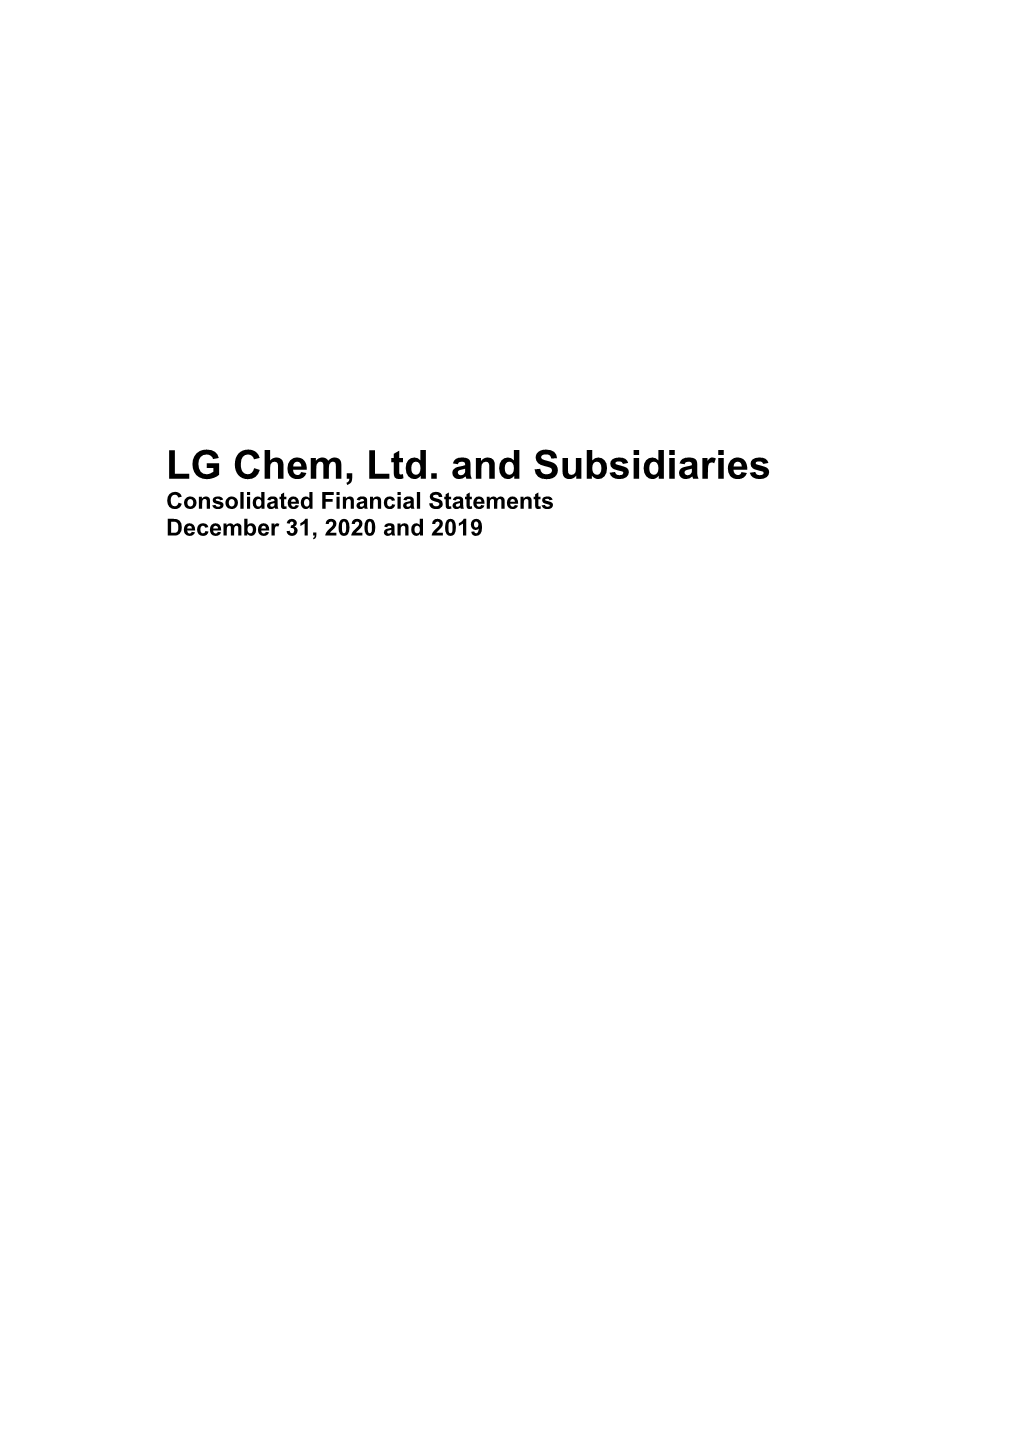 LG Chem, Ltd. and Subsidiaries Consolidated Financial Statements December 31, 2020 and 2019